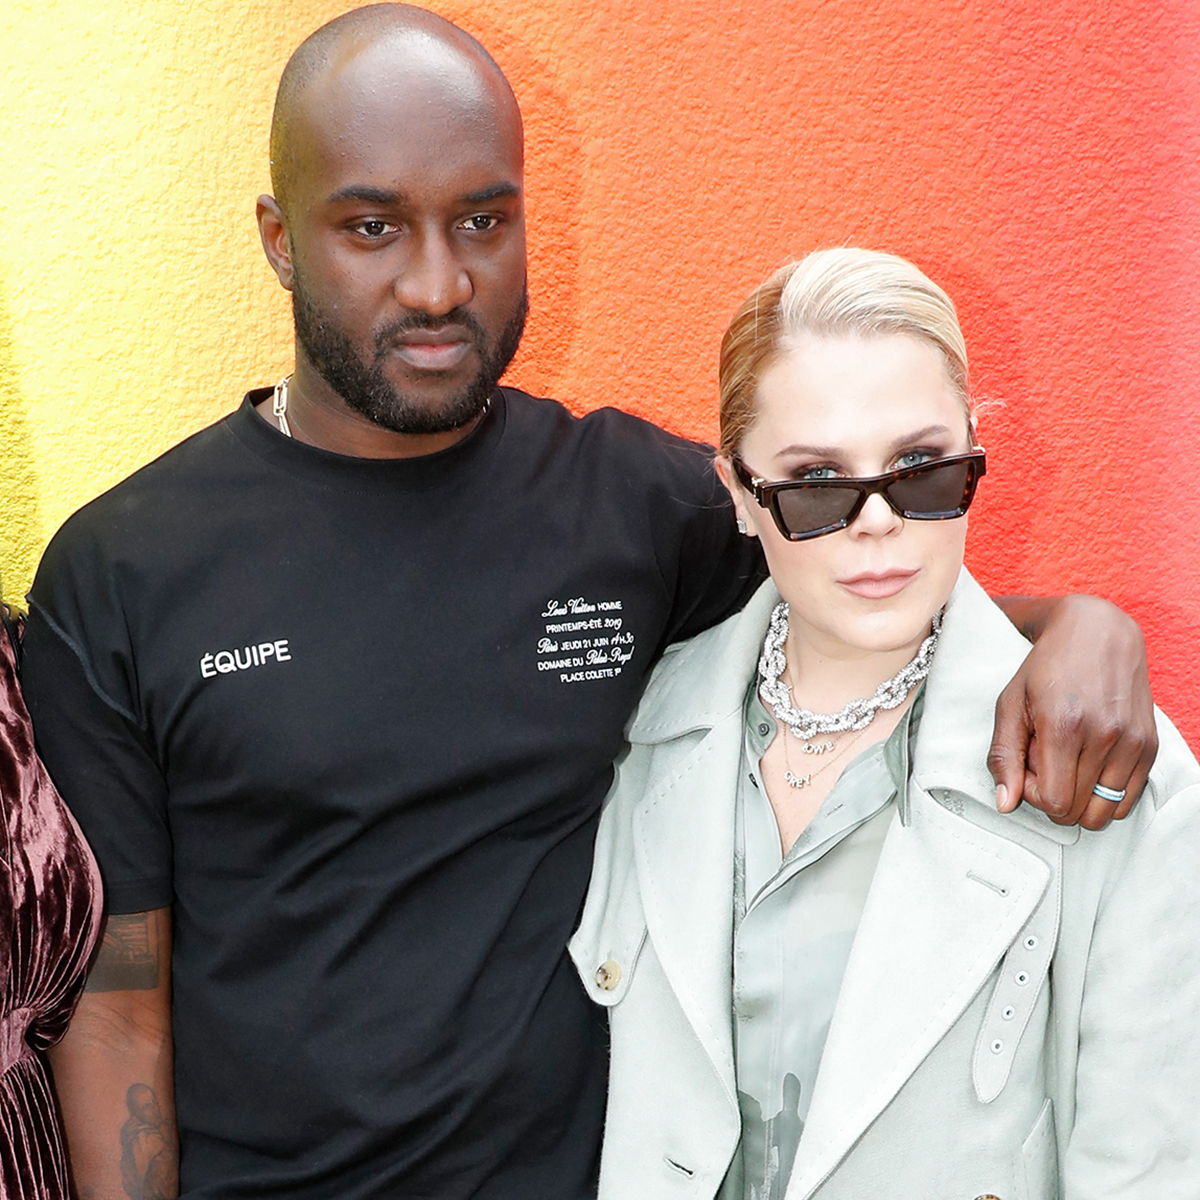 Celebs React To News Of Virgil Abloh's Passing After Battle With Cancer